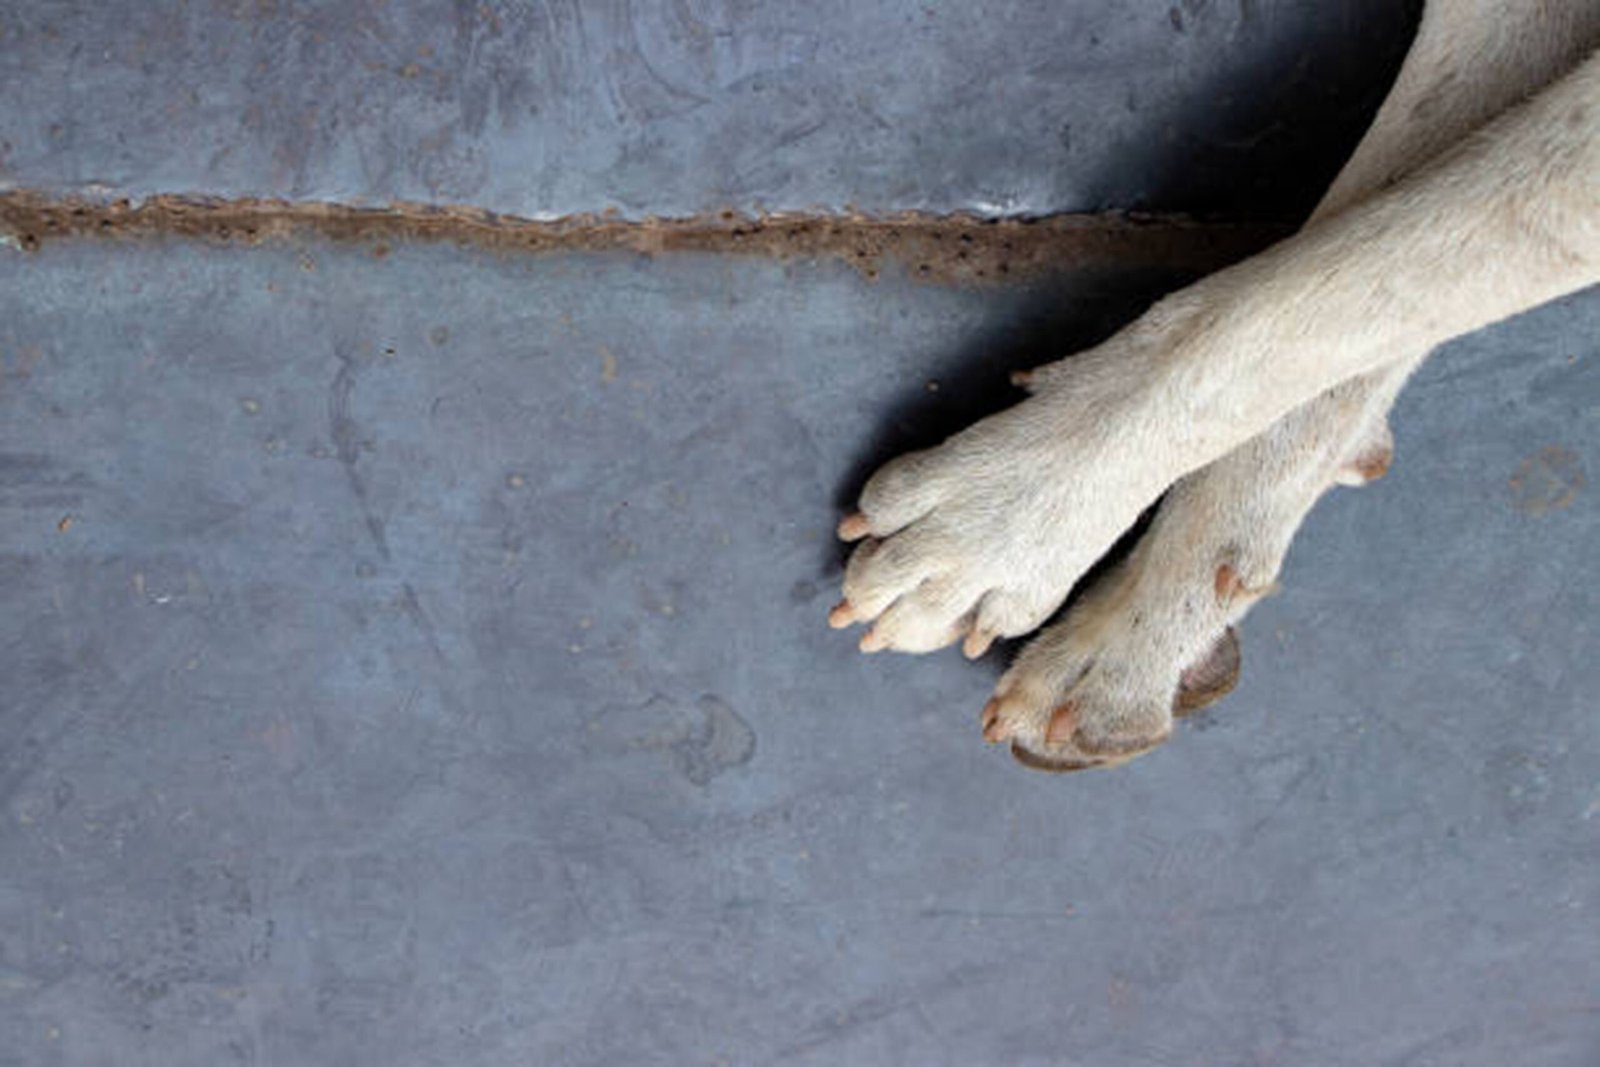 How to protect dogs’ paws on concrete